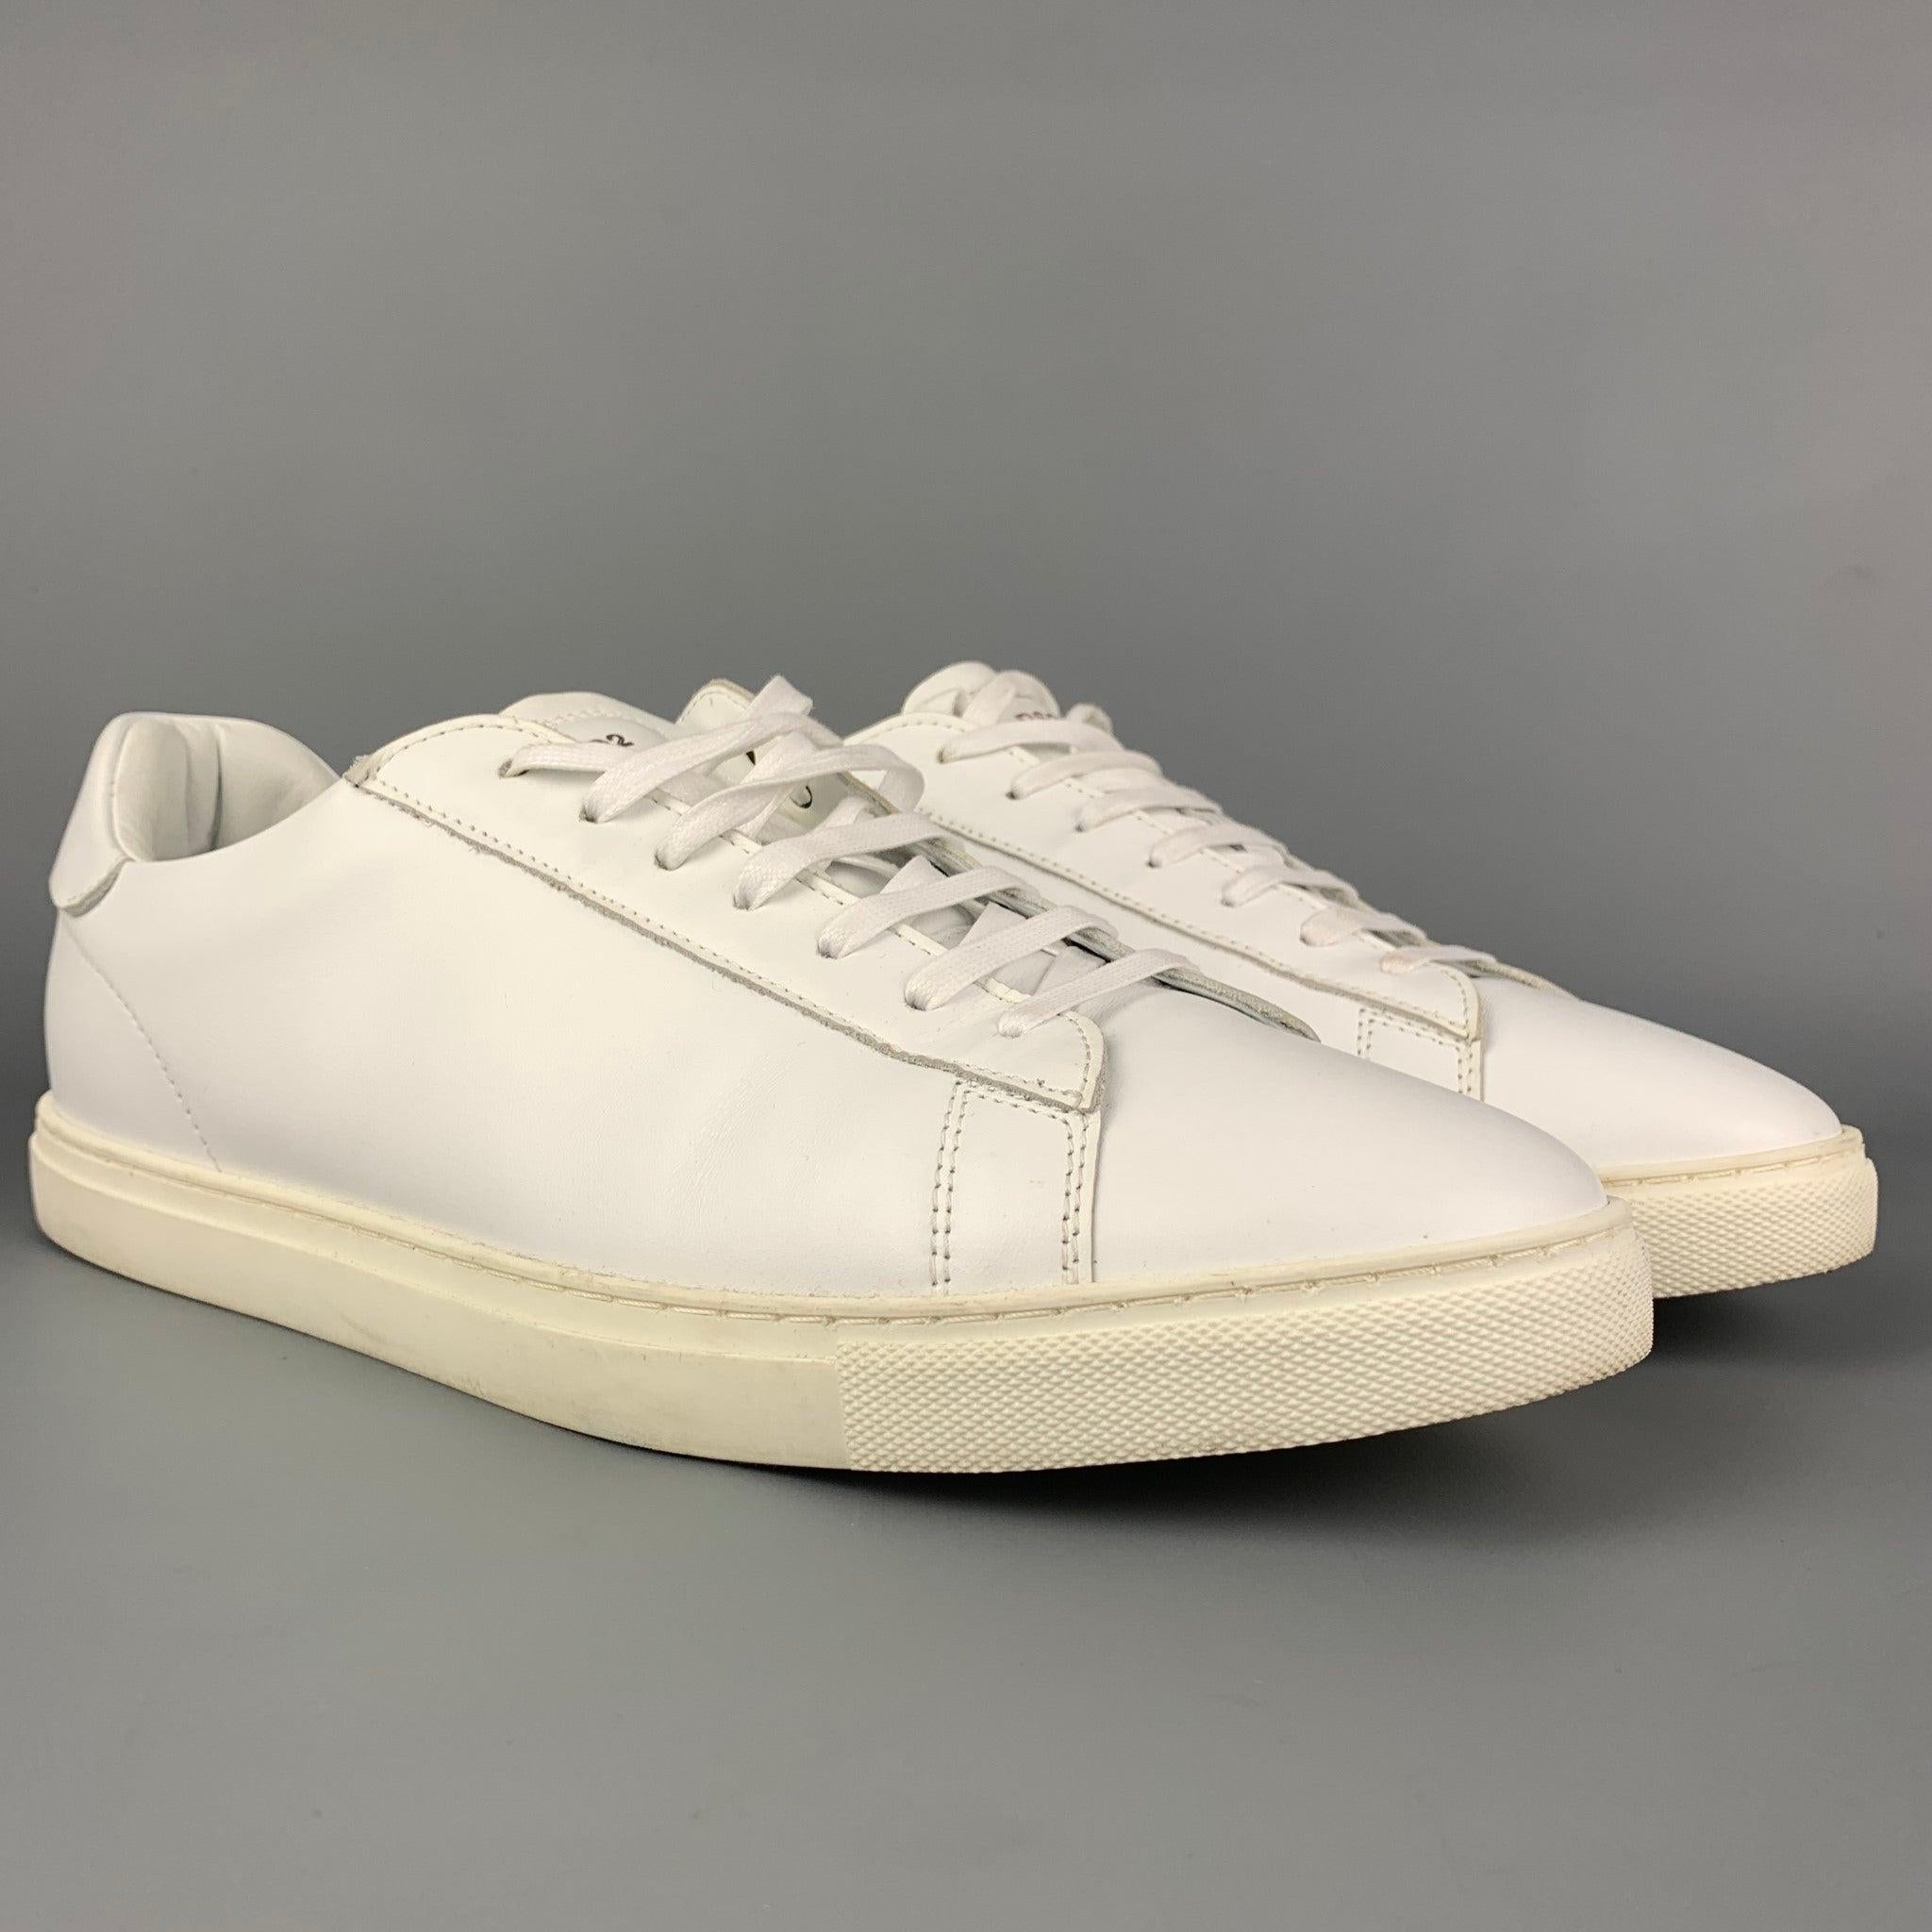 DSQUARED2 sneakers comes in a white leather featuring a rubber sole and a lace up closure. Made in Italy.
Very Good
Pre-Owned Condition. 

Marked:   43.5Outsole: 12 inches  x 4 inches 
  
  
 
Reference: 112722
Category: Sneakers
More Details
   